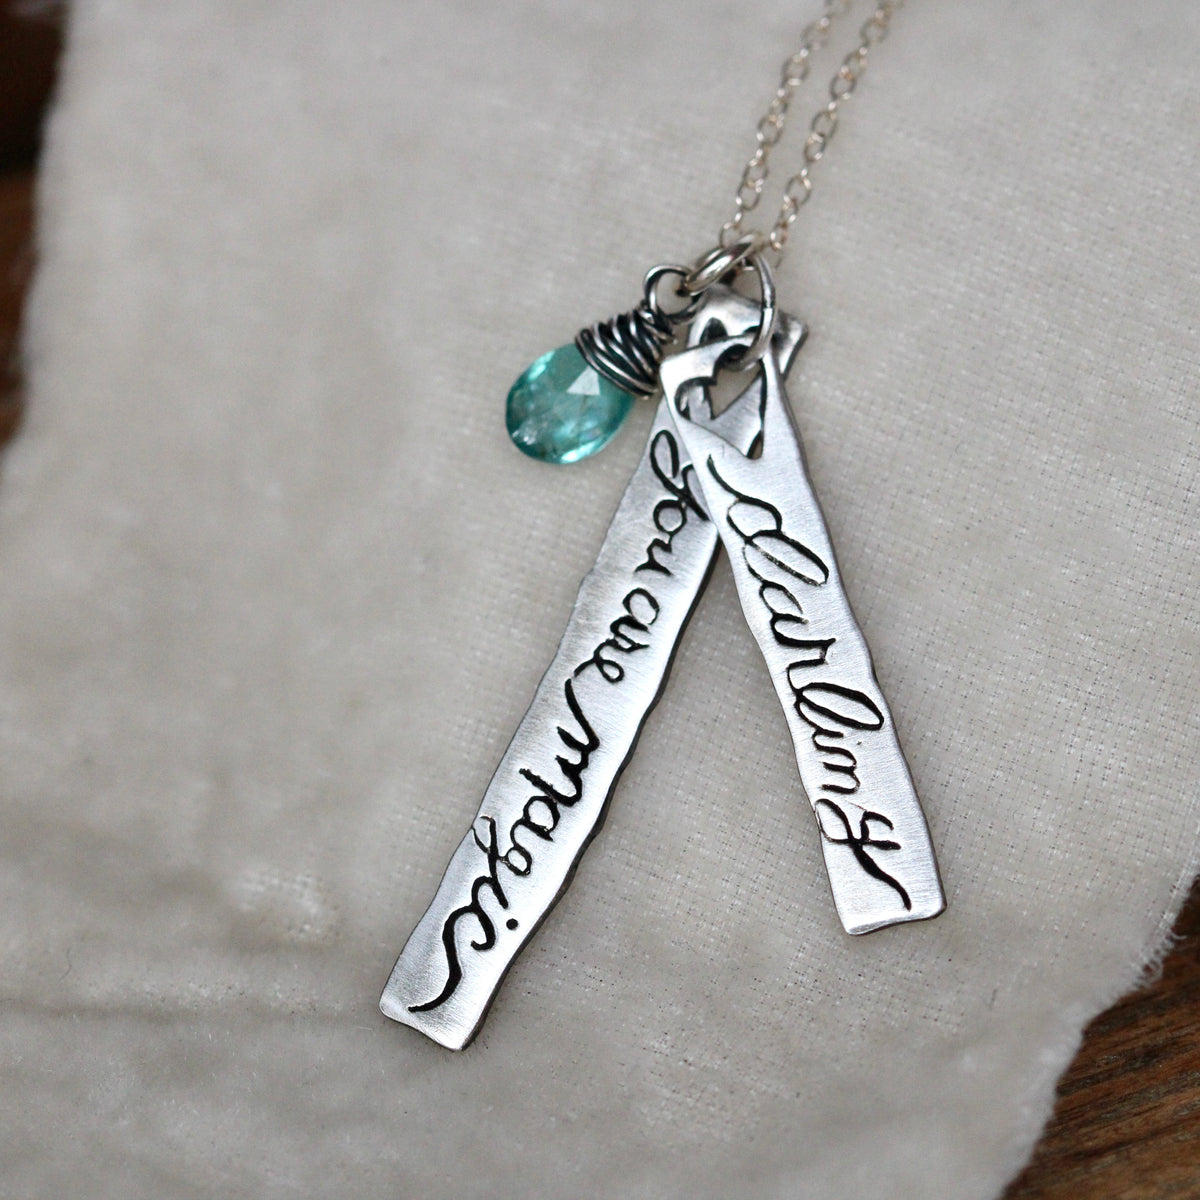 Darling You are Magic sterling silver and apatite necklace